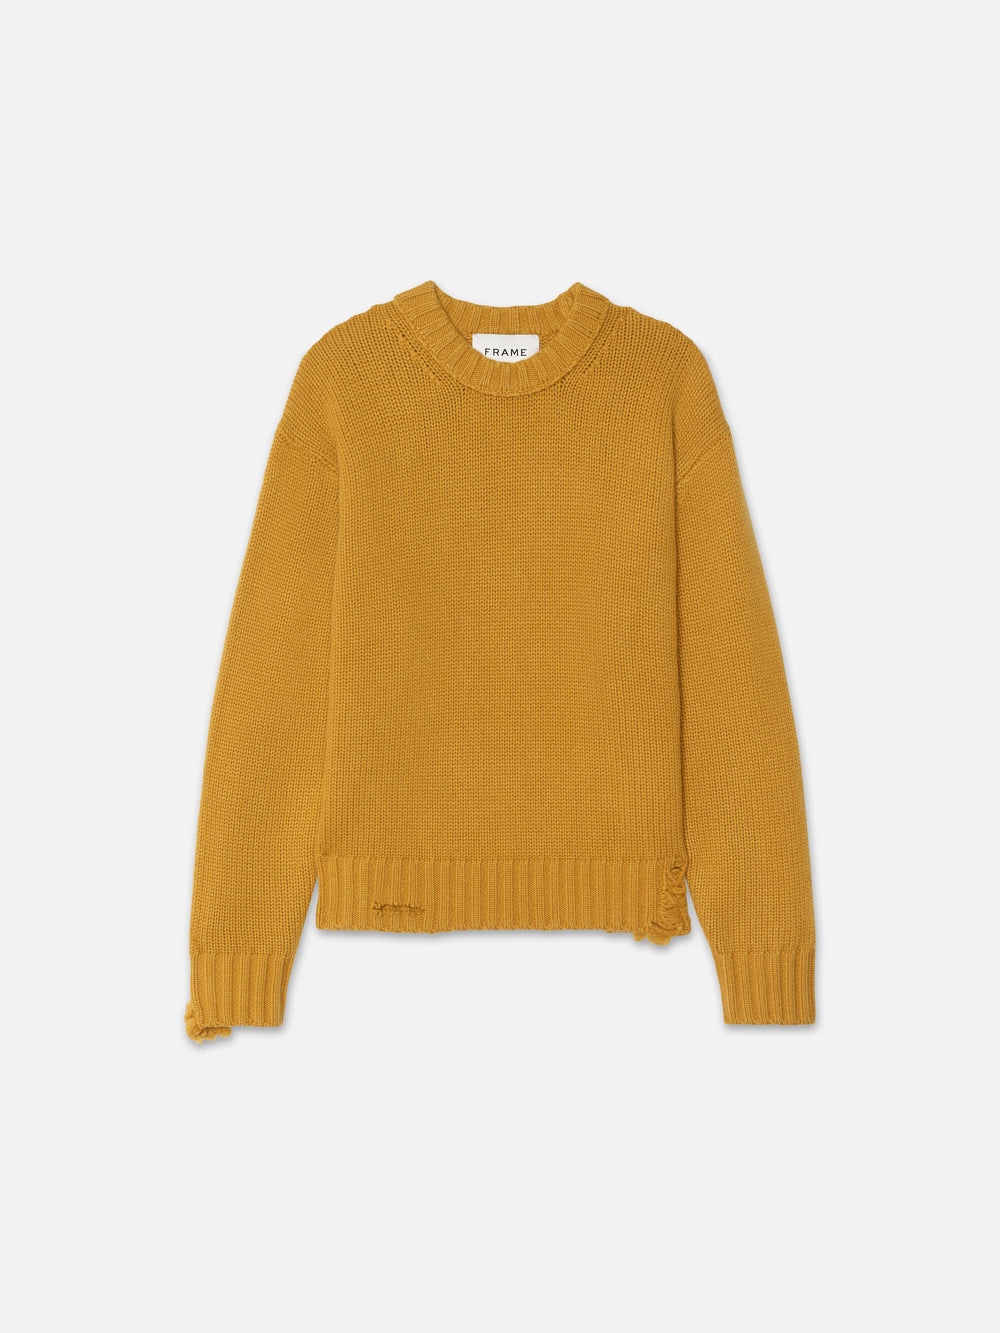 Destroyed Cashmere Sweater in Yellow - 1